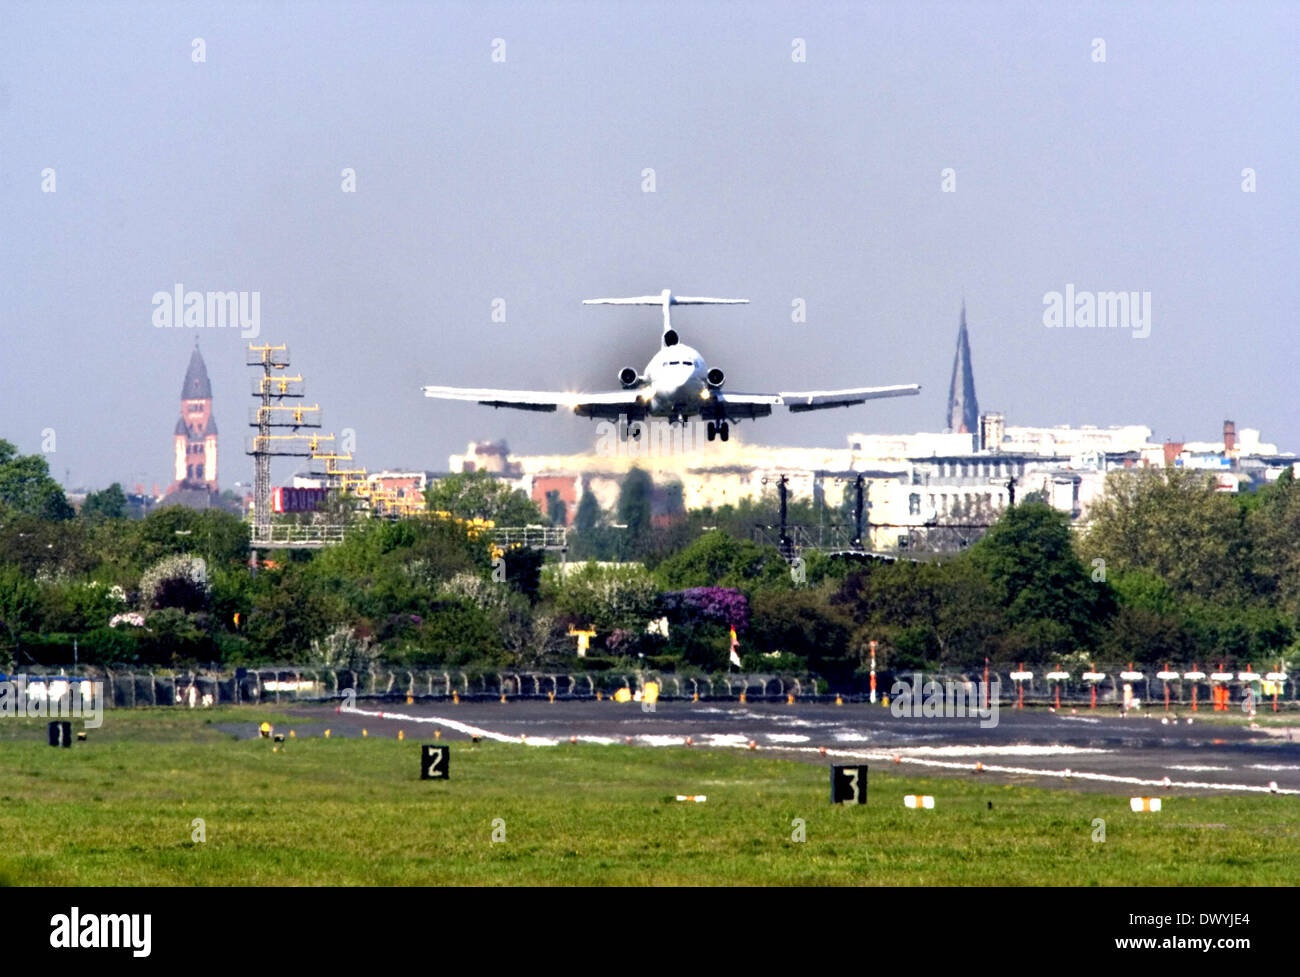 Aircraft on landing approach Stock Photo